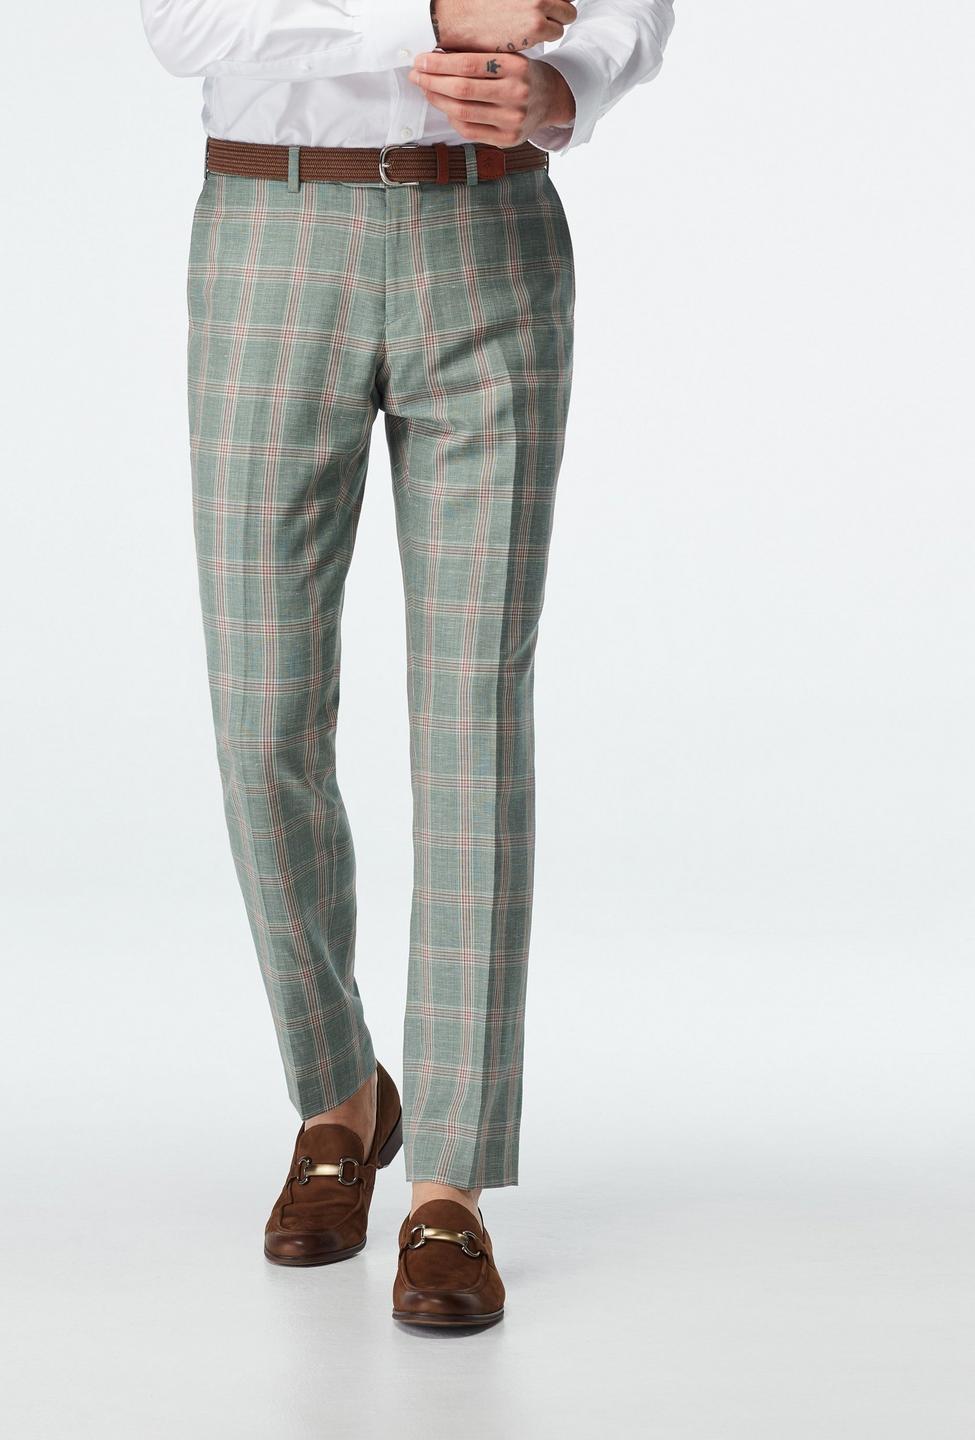 Green pants - Southwell Plaid Design from Seasonal Indochino Collection